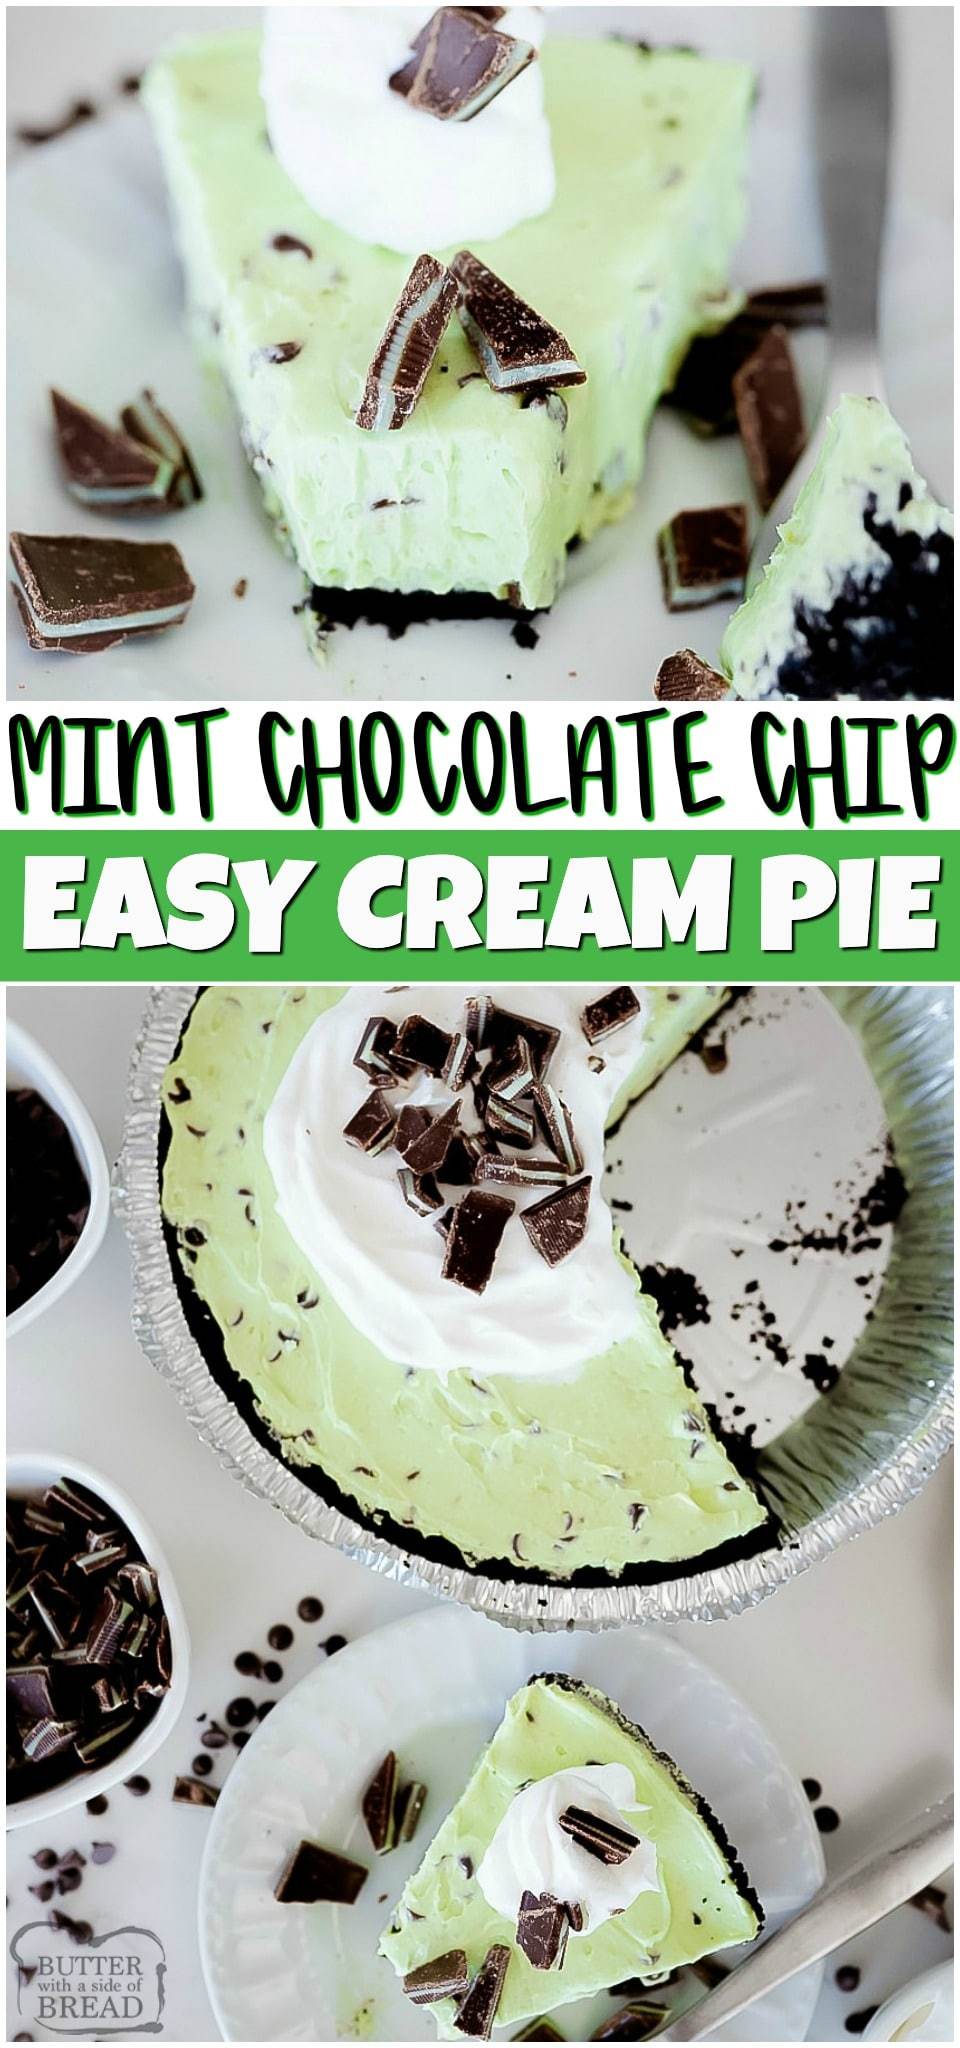 Mint Chocolate Chip Cream Pie is a creamy mint pie loaded with chocolate chips! This easy pie recipe has smooth mint cream filling mixed with chocolate chips & Andes mints all in an Oreo pie crust. #Chocolate #Mint lovers rejoice! #pie #creampie #easydessert #dessert #mintchocolate #chocolatechip #recipe from BUTTER WITH A SIDE OF BREAD